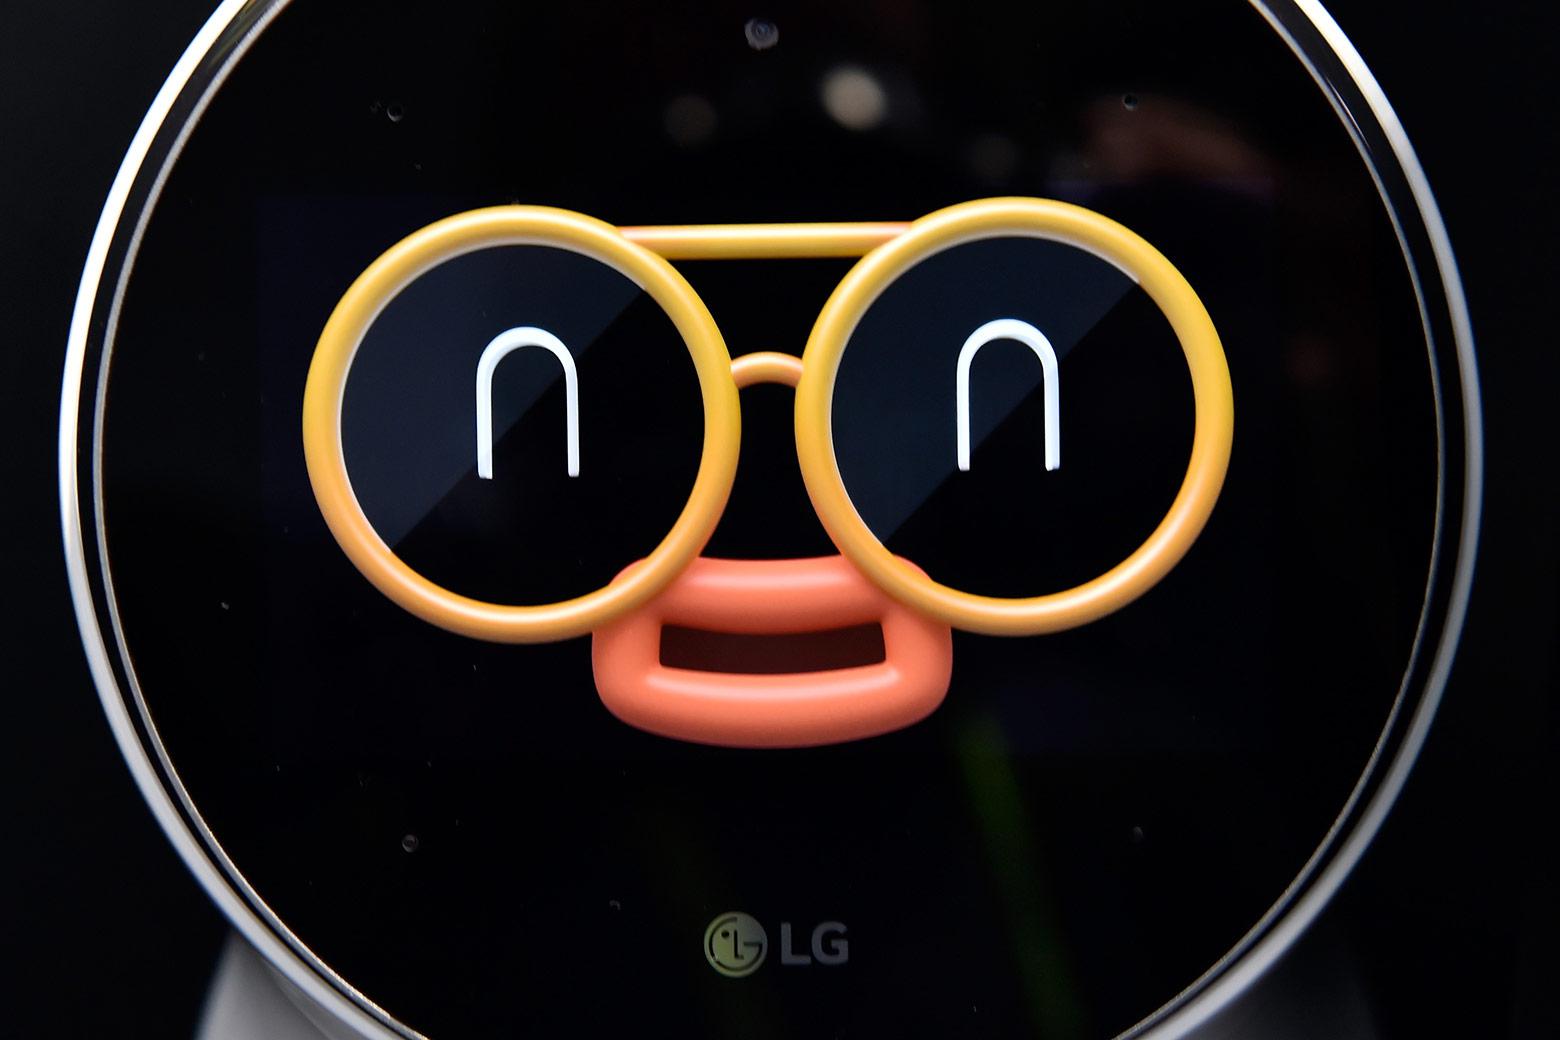 The cartoonish face of LG’s Cloi personal assistant robot.